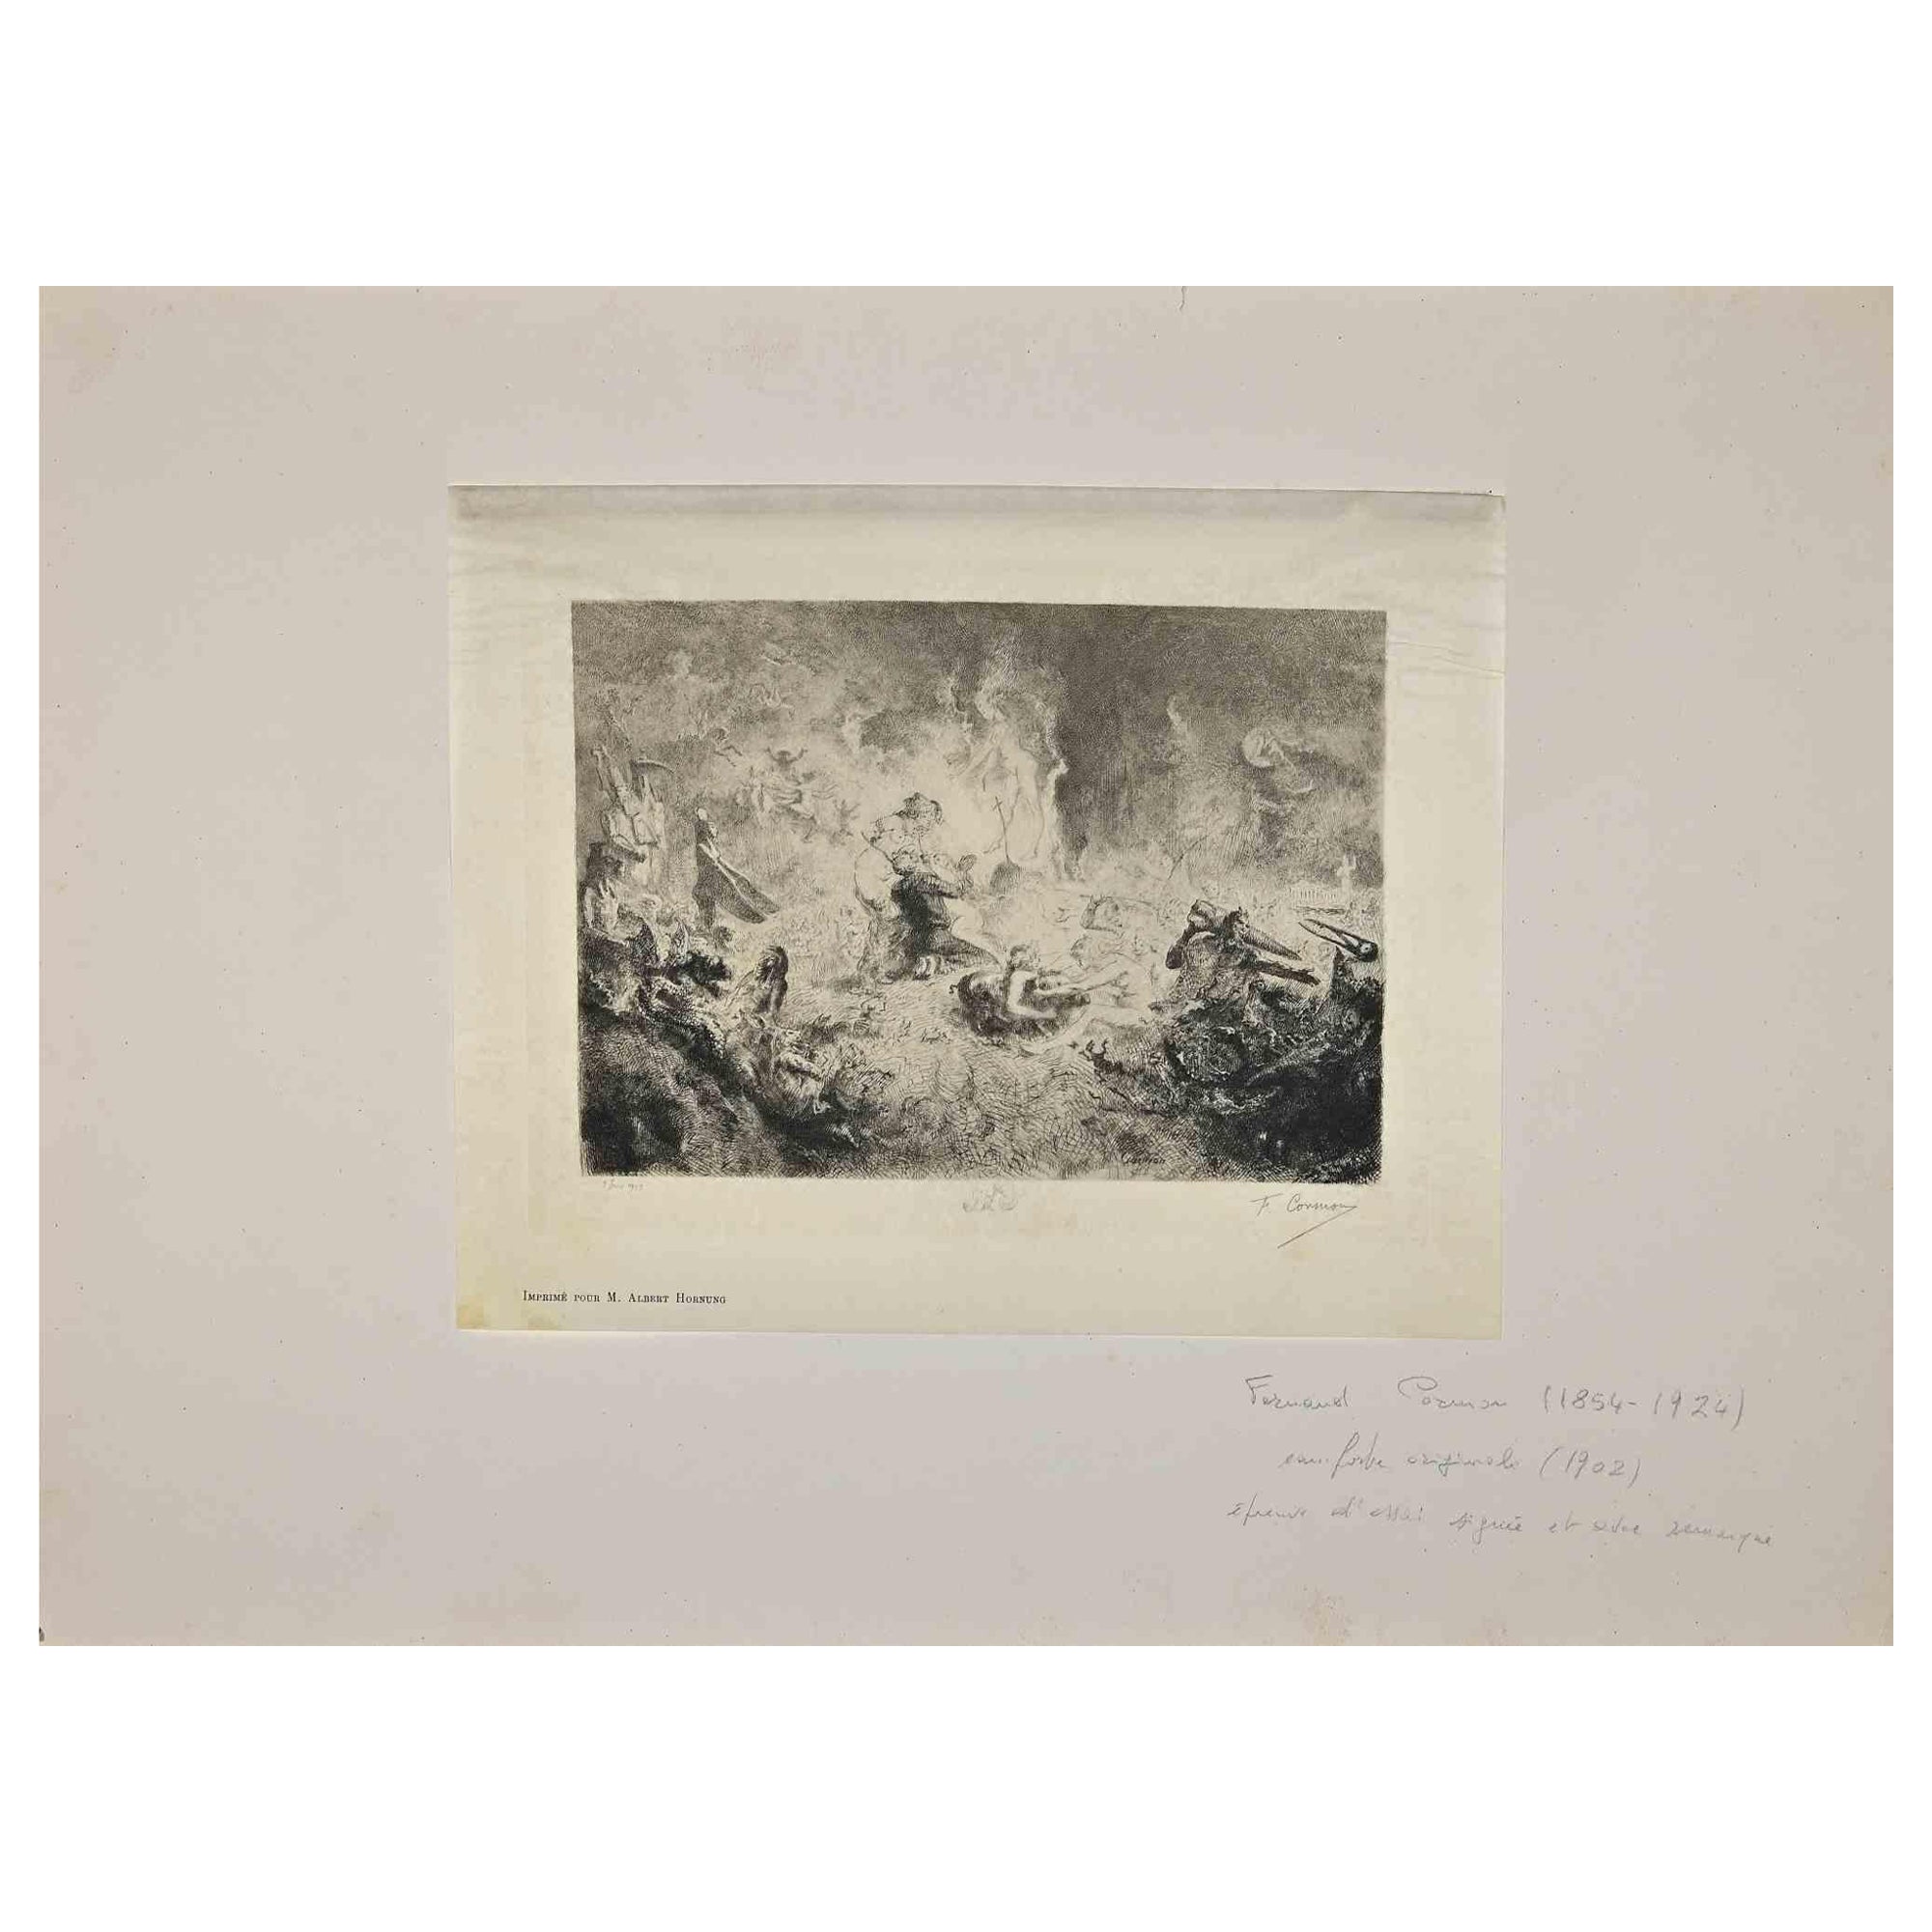 Mythological Composition is an Original Etching realized by Fernand Cormon (1854-1924) in 1902.

Good condition, included a cardboard passpartout (45x63 cm).

Hand signed by the artist on the lower right corner.

Printed by M. Albert